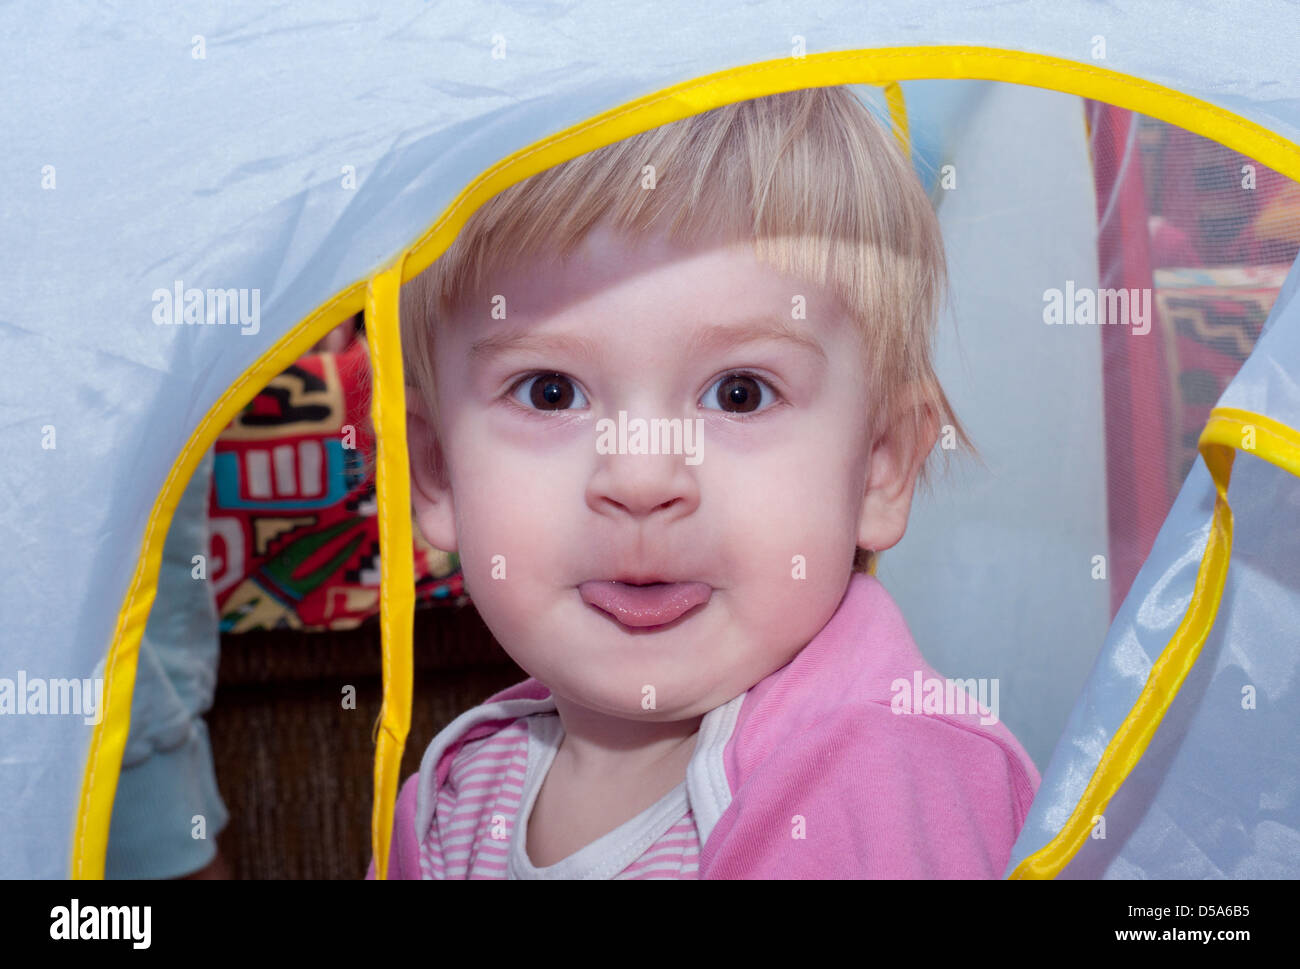 the nice child is siting in the blue baby's house and showing tongue Stock Photo